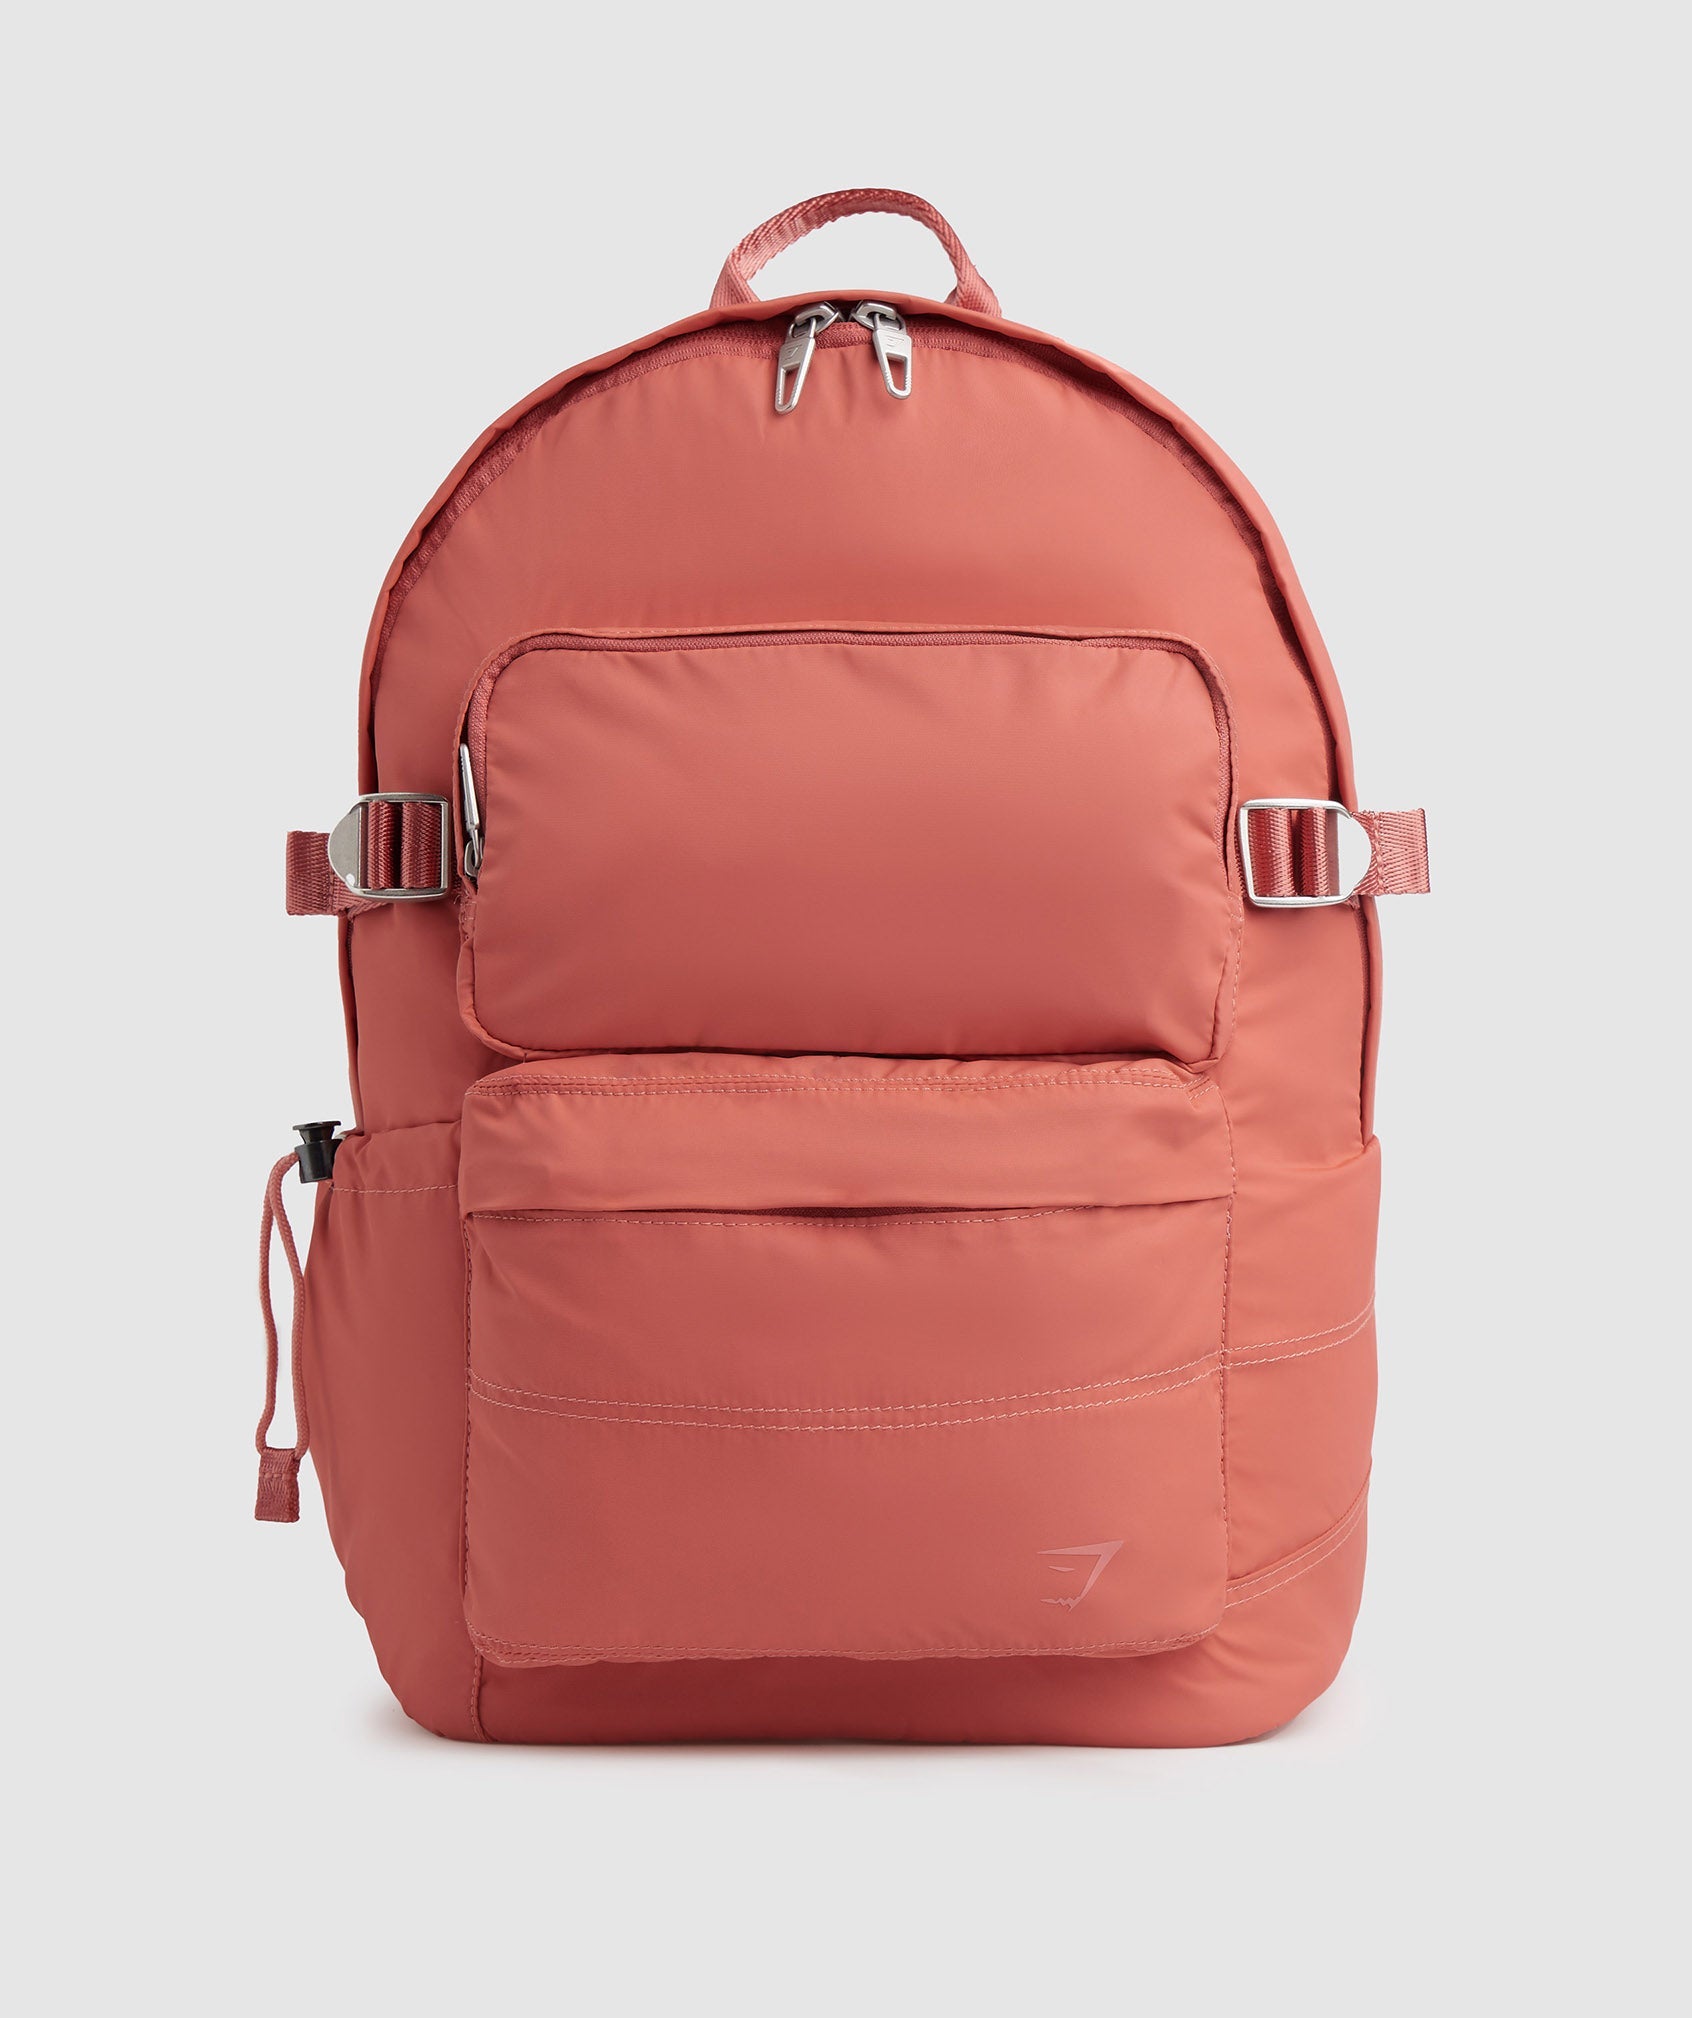 Premium Lifestyle Backpack in Terracotta Pink - view 1